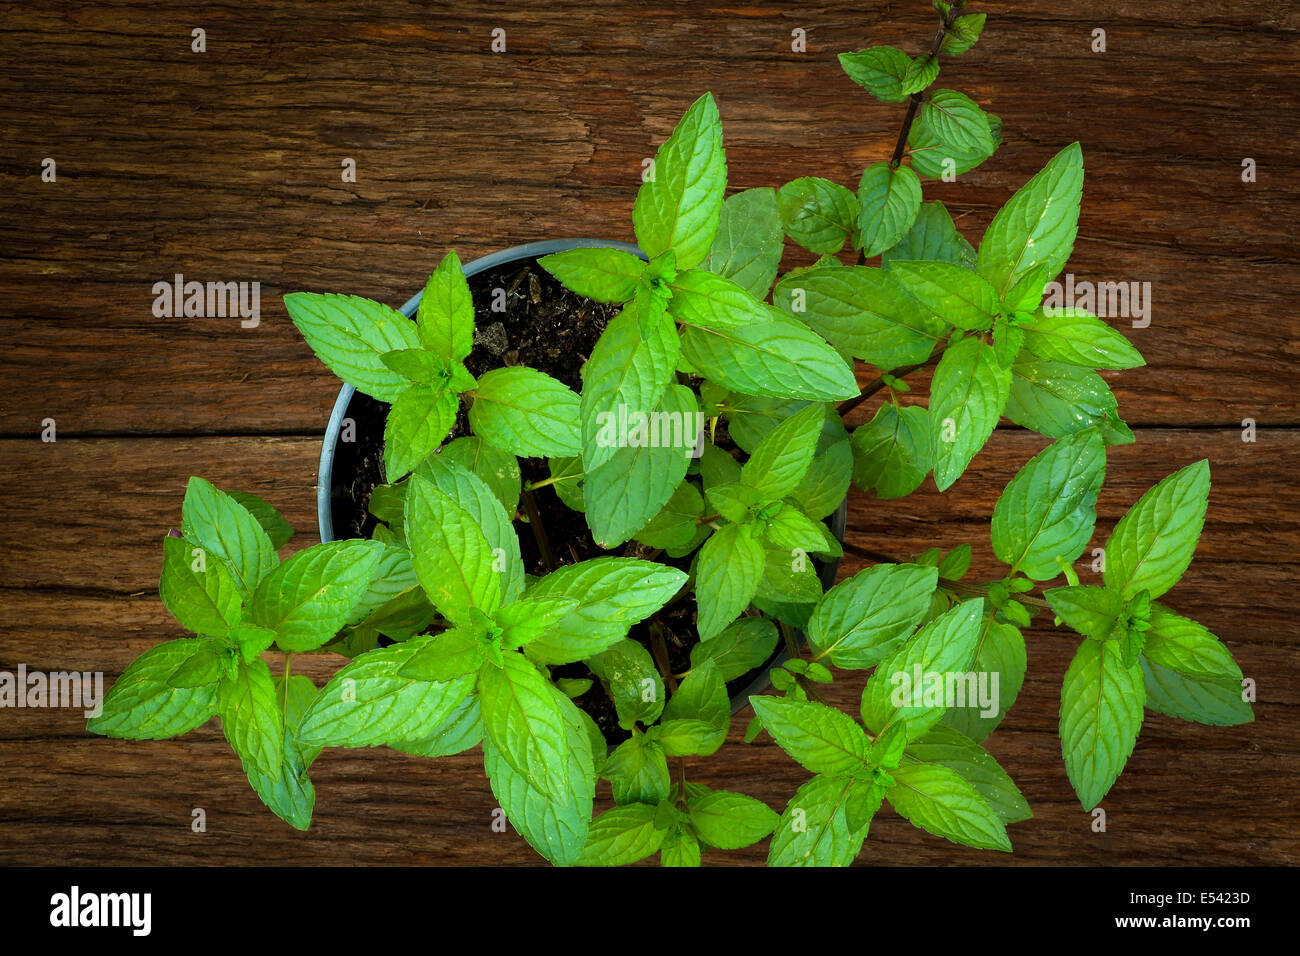 Pepper plant mint leaves in black pot on old wood background Stock Photo